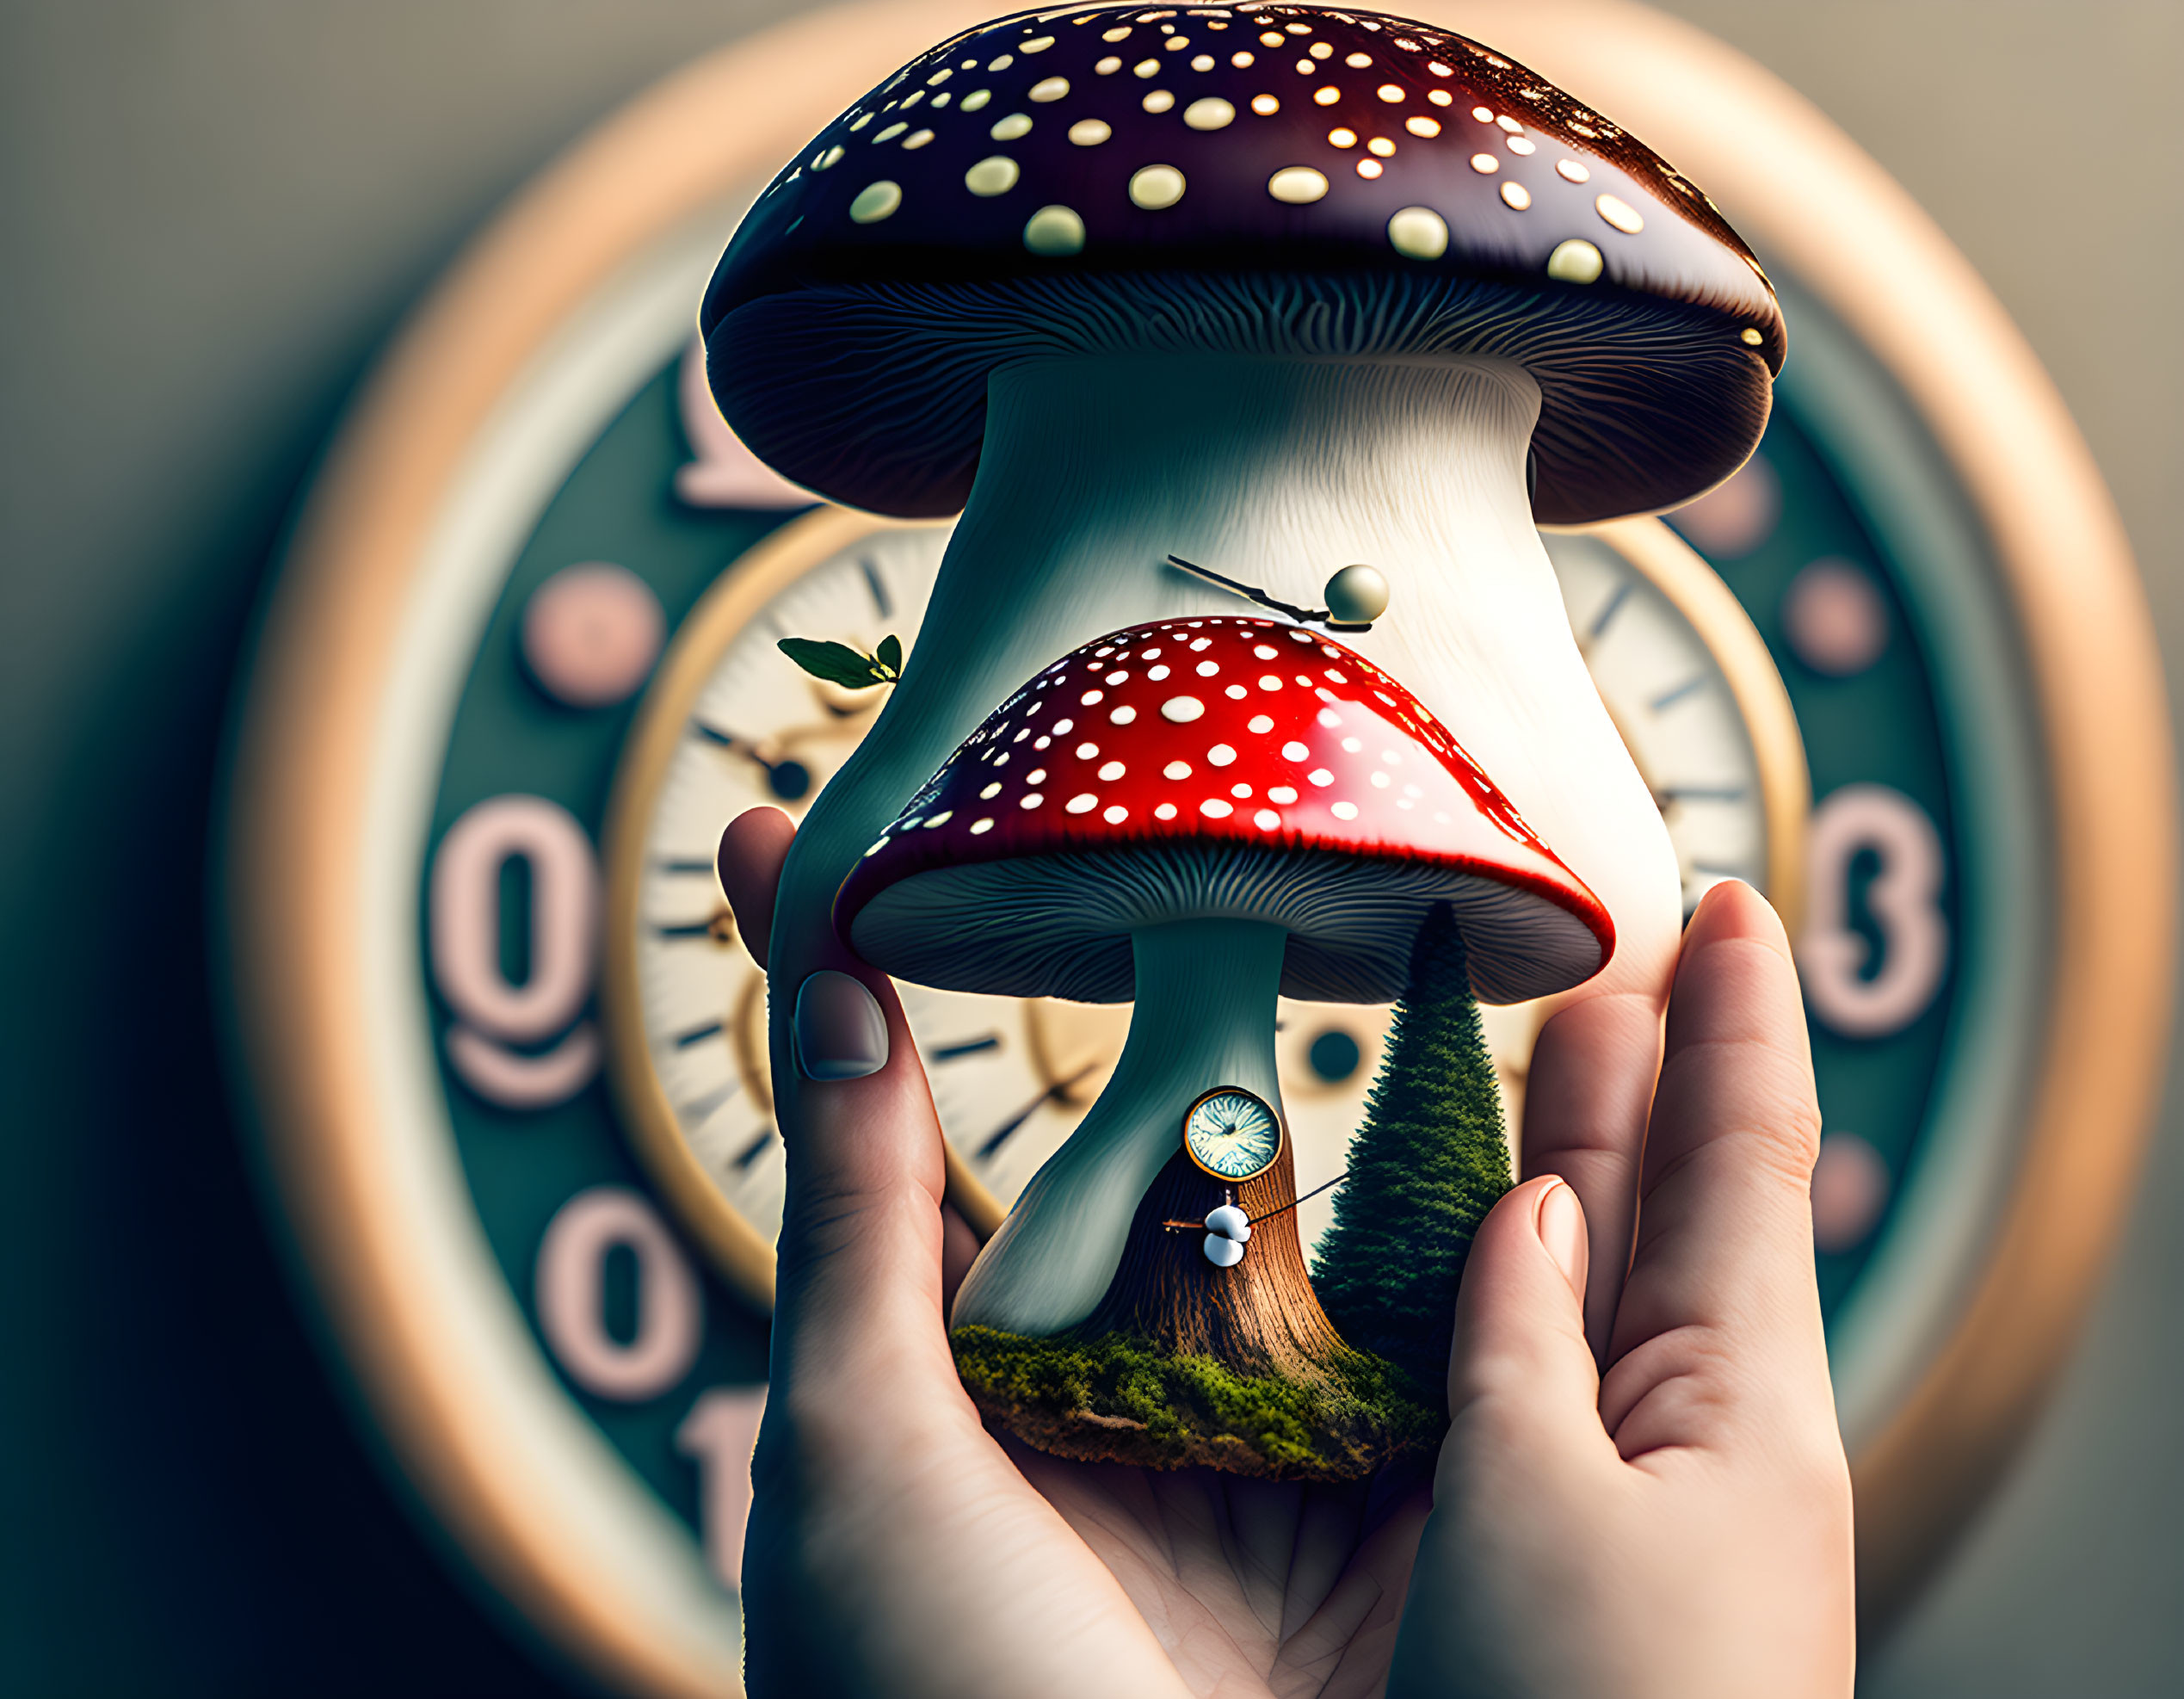 Surreal image of hands holding large mushroom with door, window, grass, and clock face